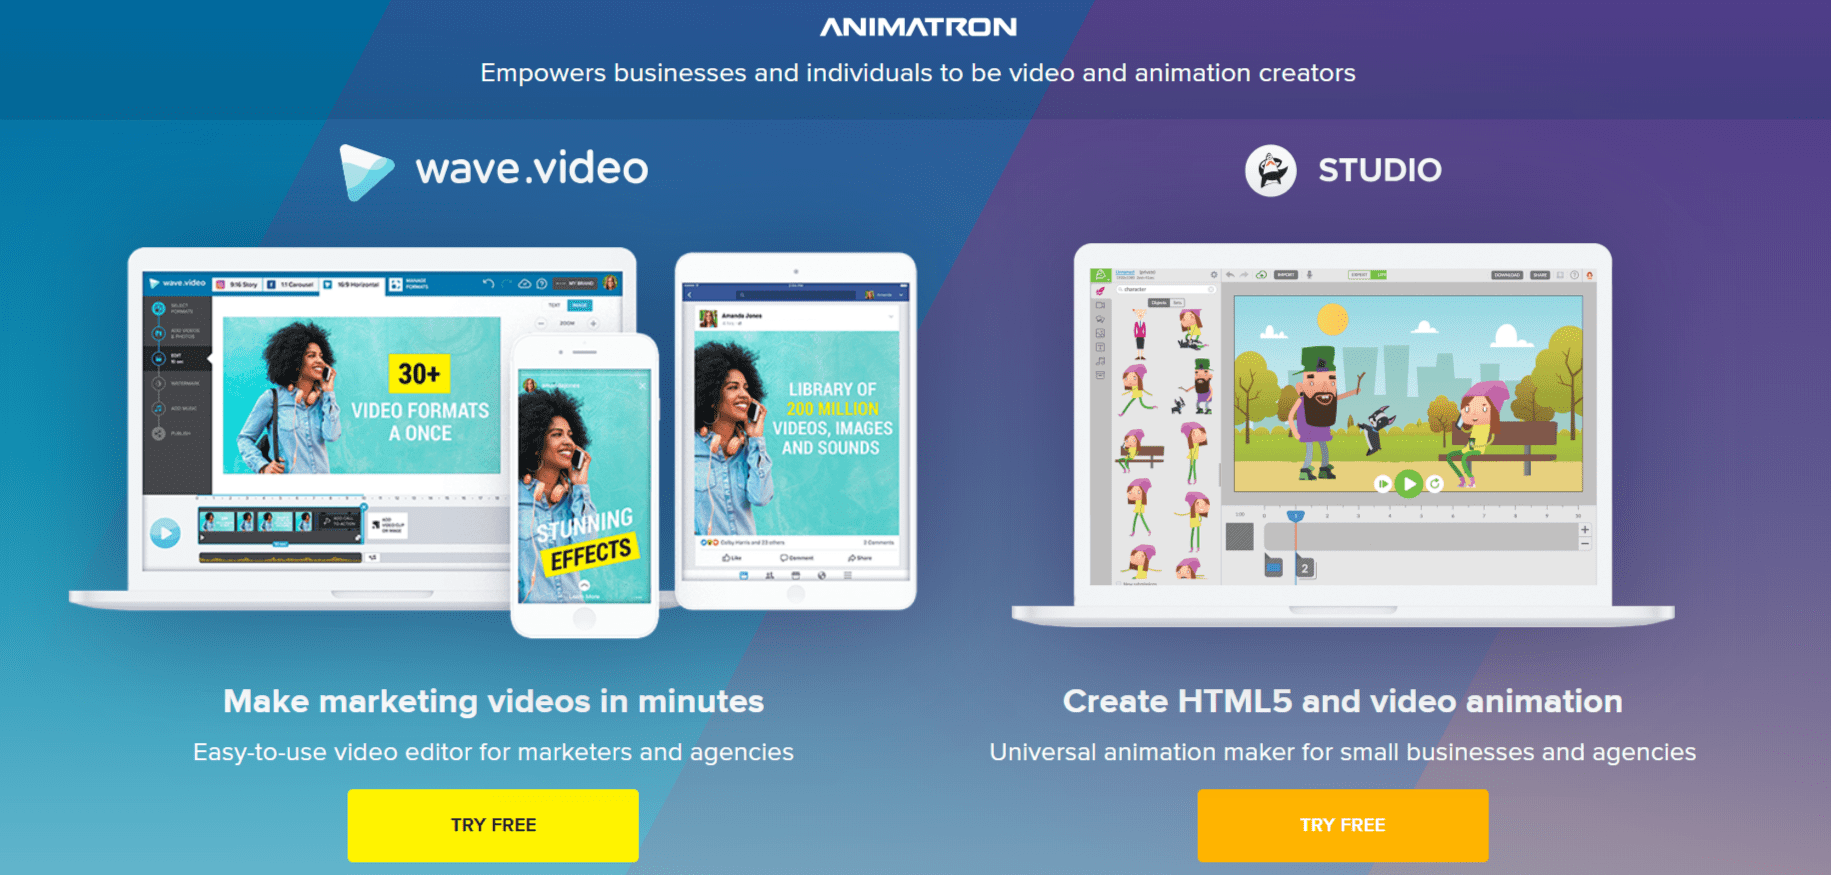 Animatron Coupon Codes- The Best Video Editor